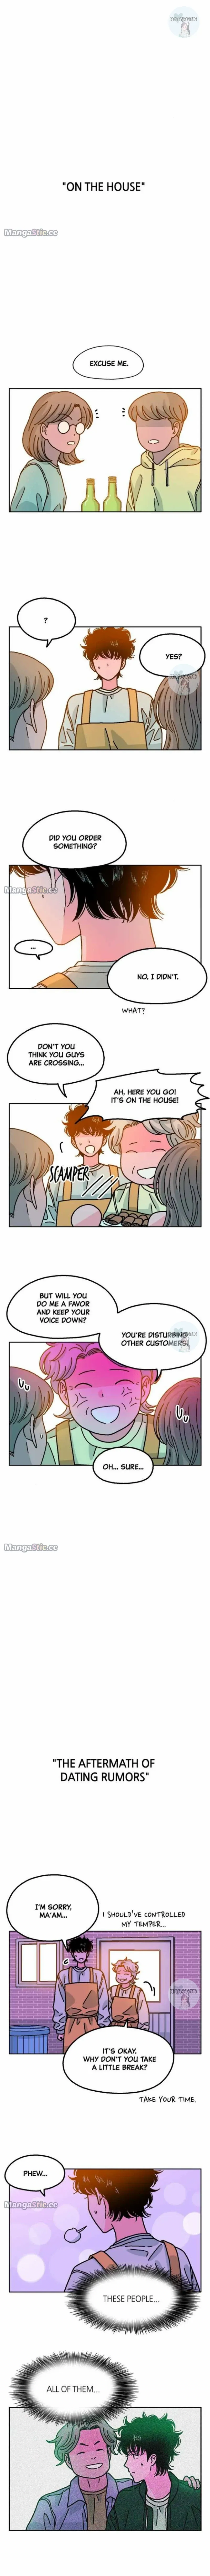 Just One Bite! - Page 3